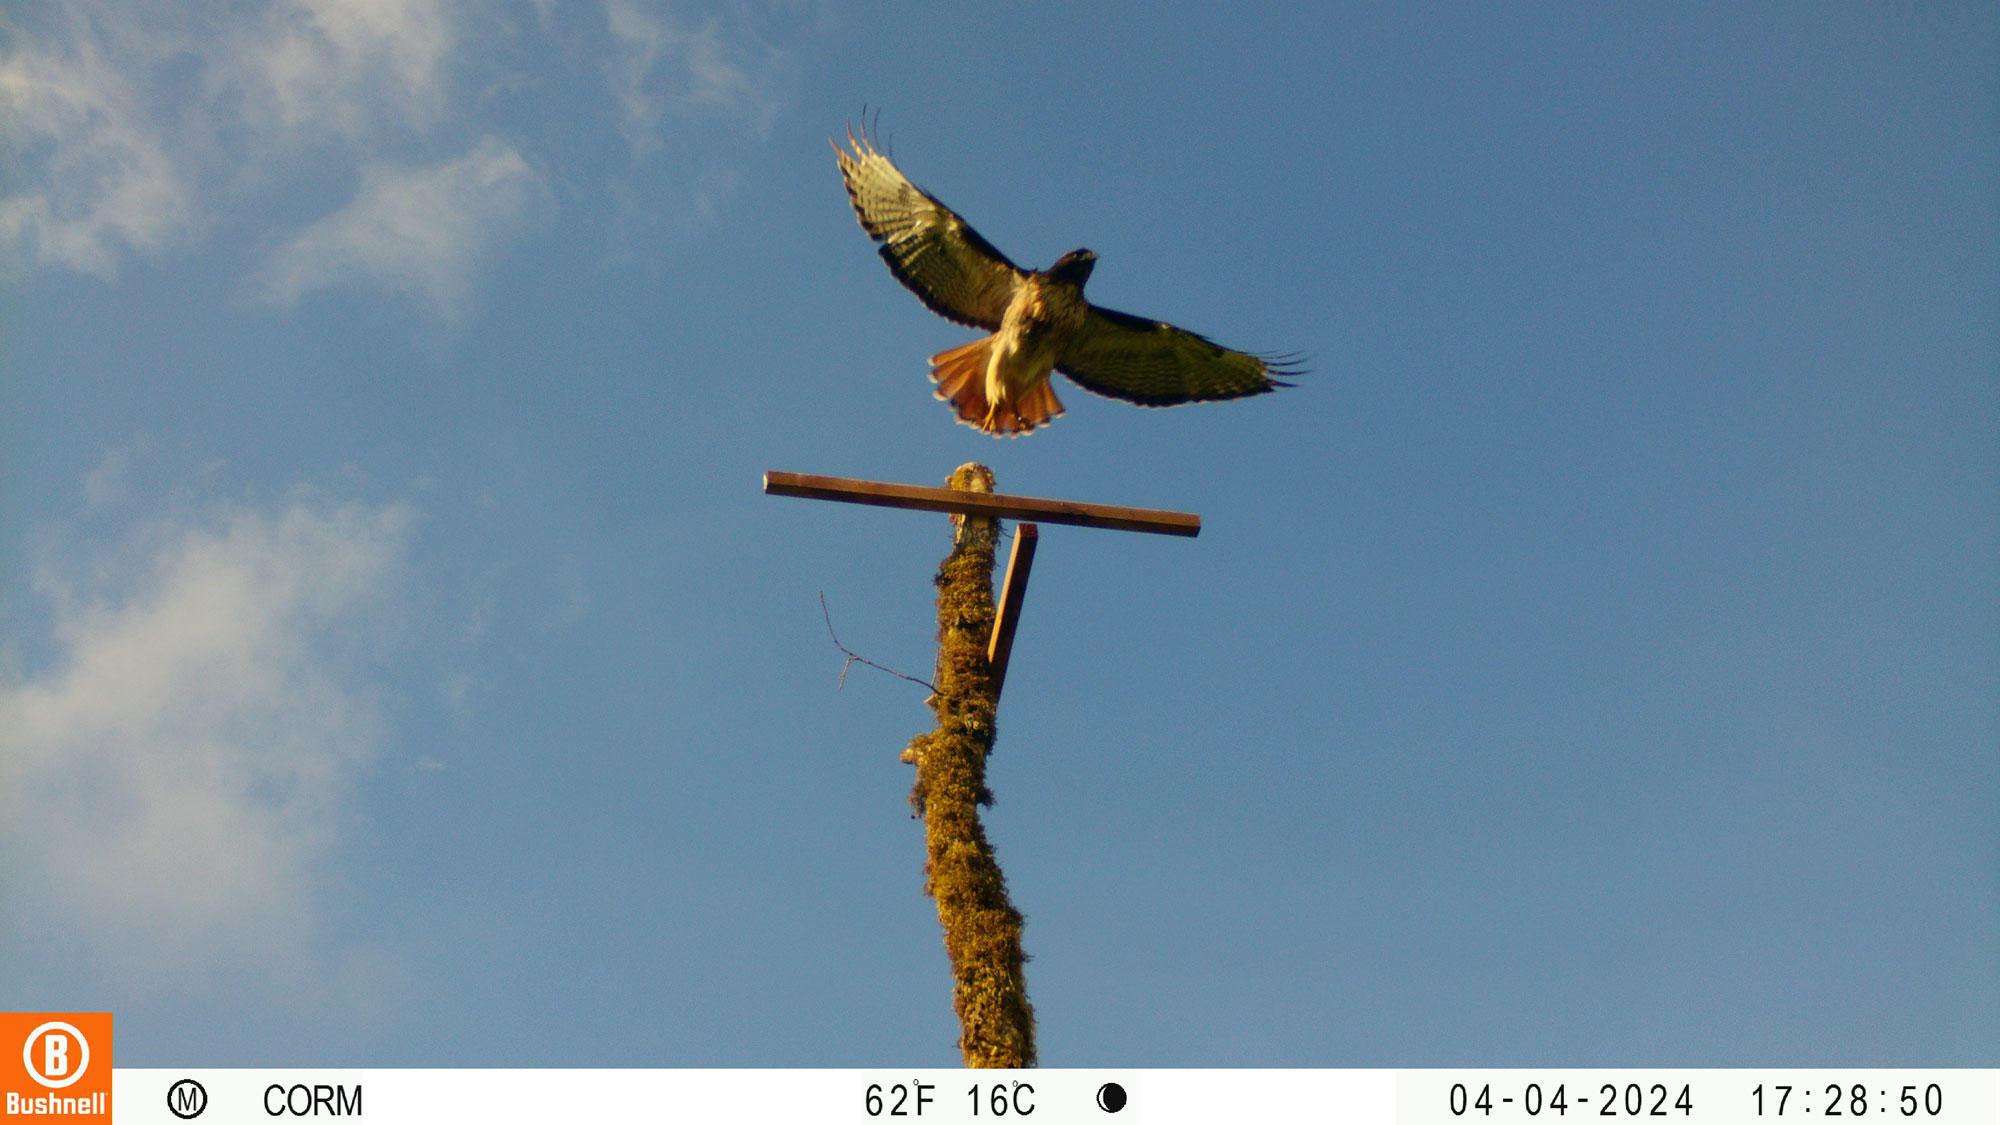 A motion-sensing camera captures an image of a red-tailed hawk alighting on a perch constructed at Double J Jerseys dairy farm.